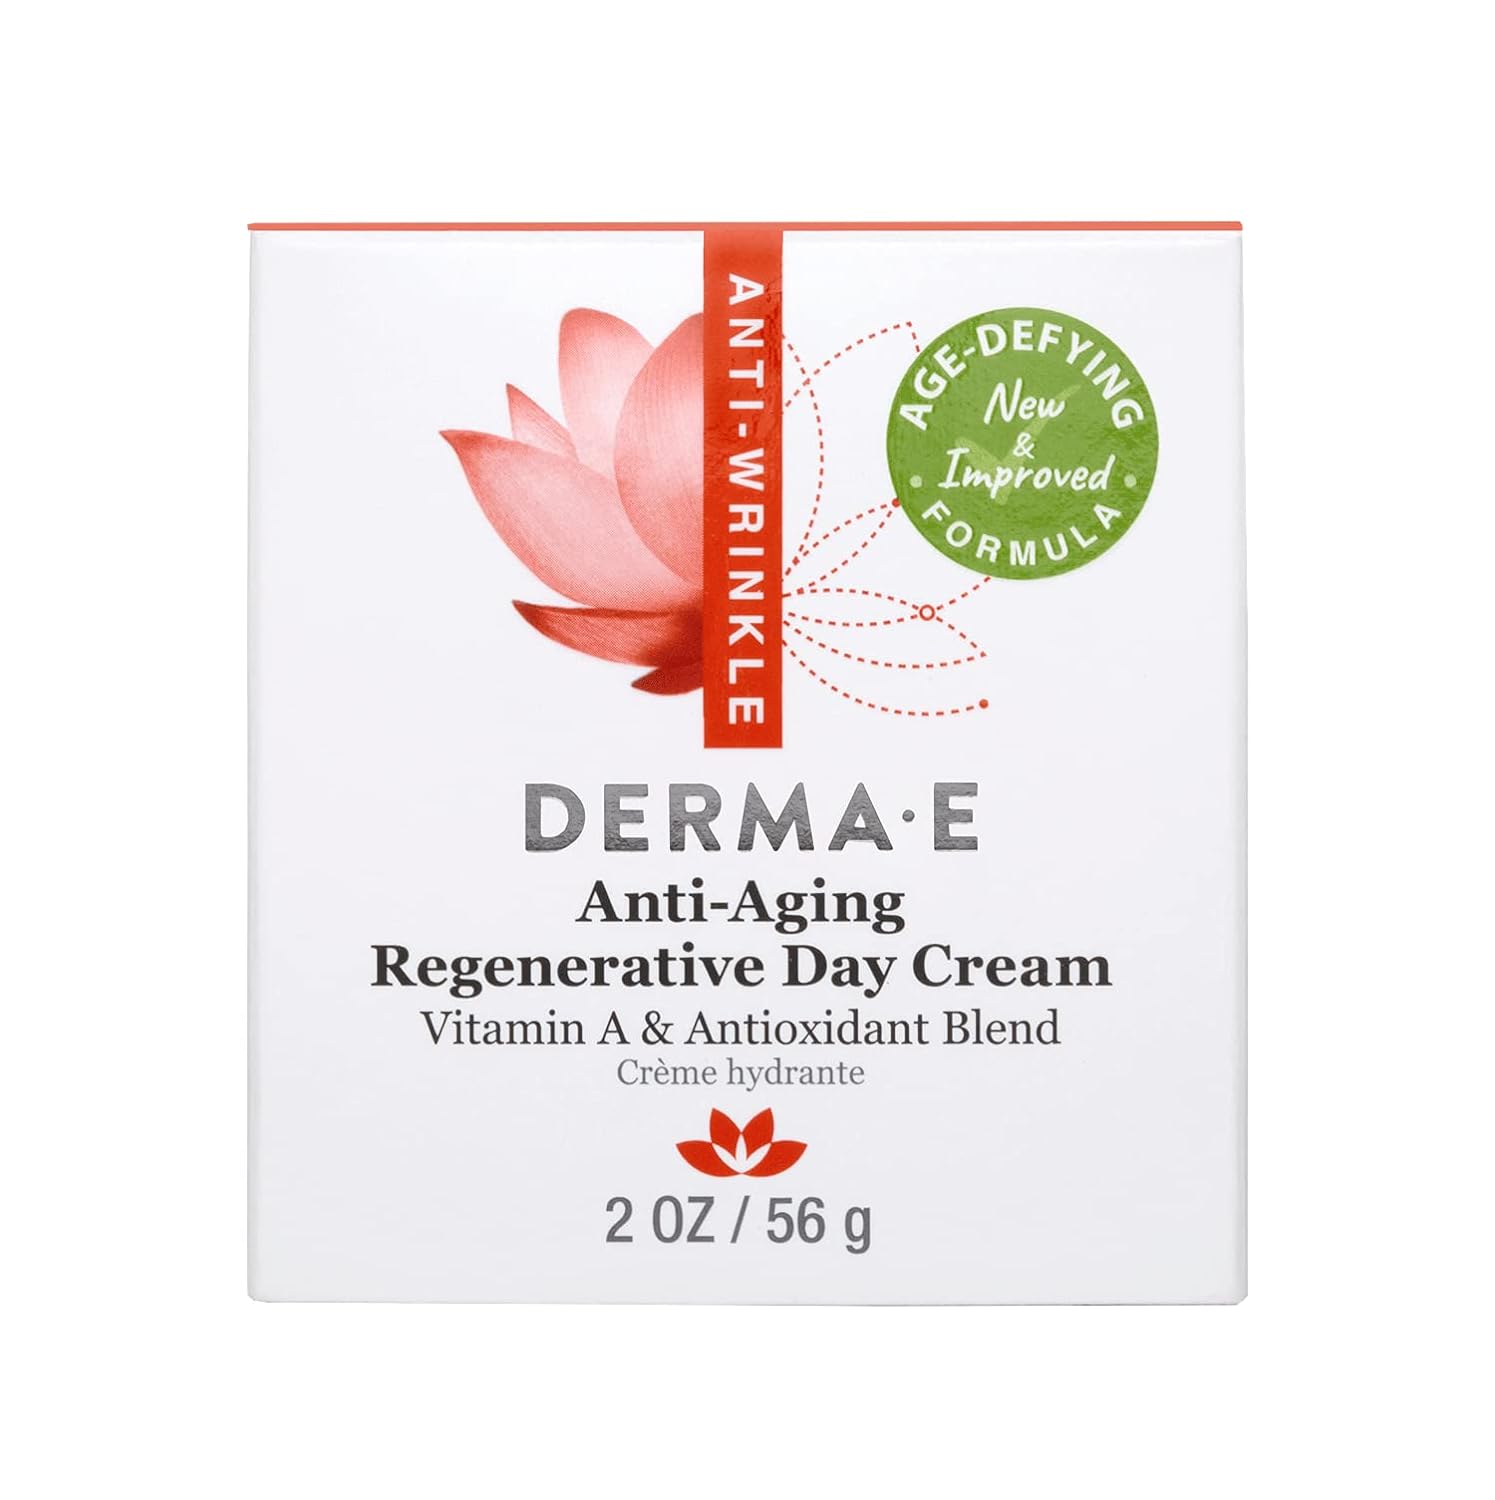 DERMA-E Anti-Aging Regenerative Day Cream – Astaxanthin Moisturizer for Face – Lightweight Firming Anti-Wrinkle Cream with Lavender, Jojoba Oil and Vitamin E, 2 oz : Beauty & Personal Care